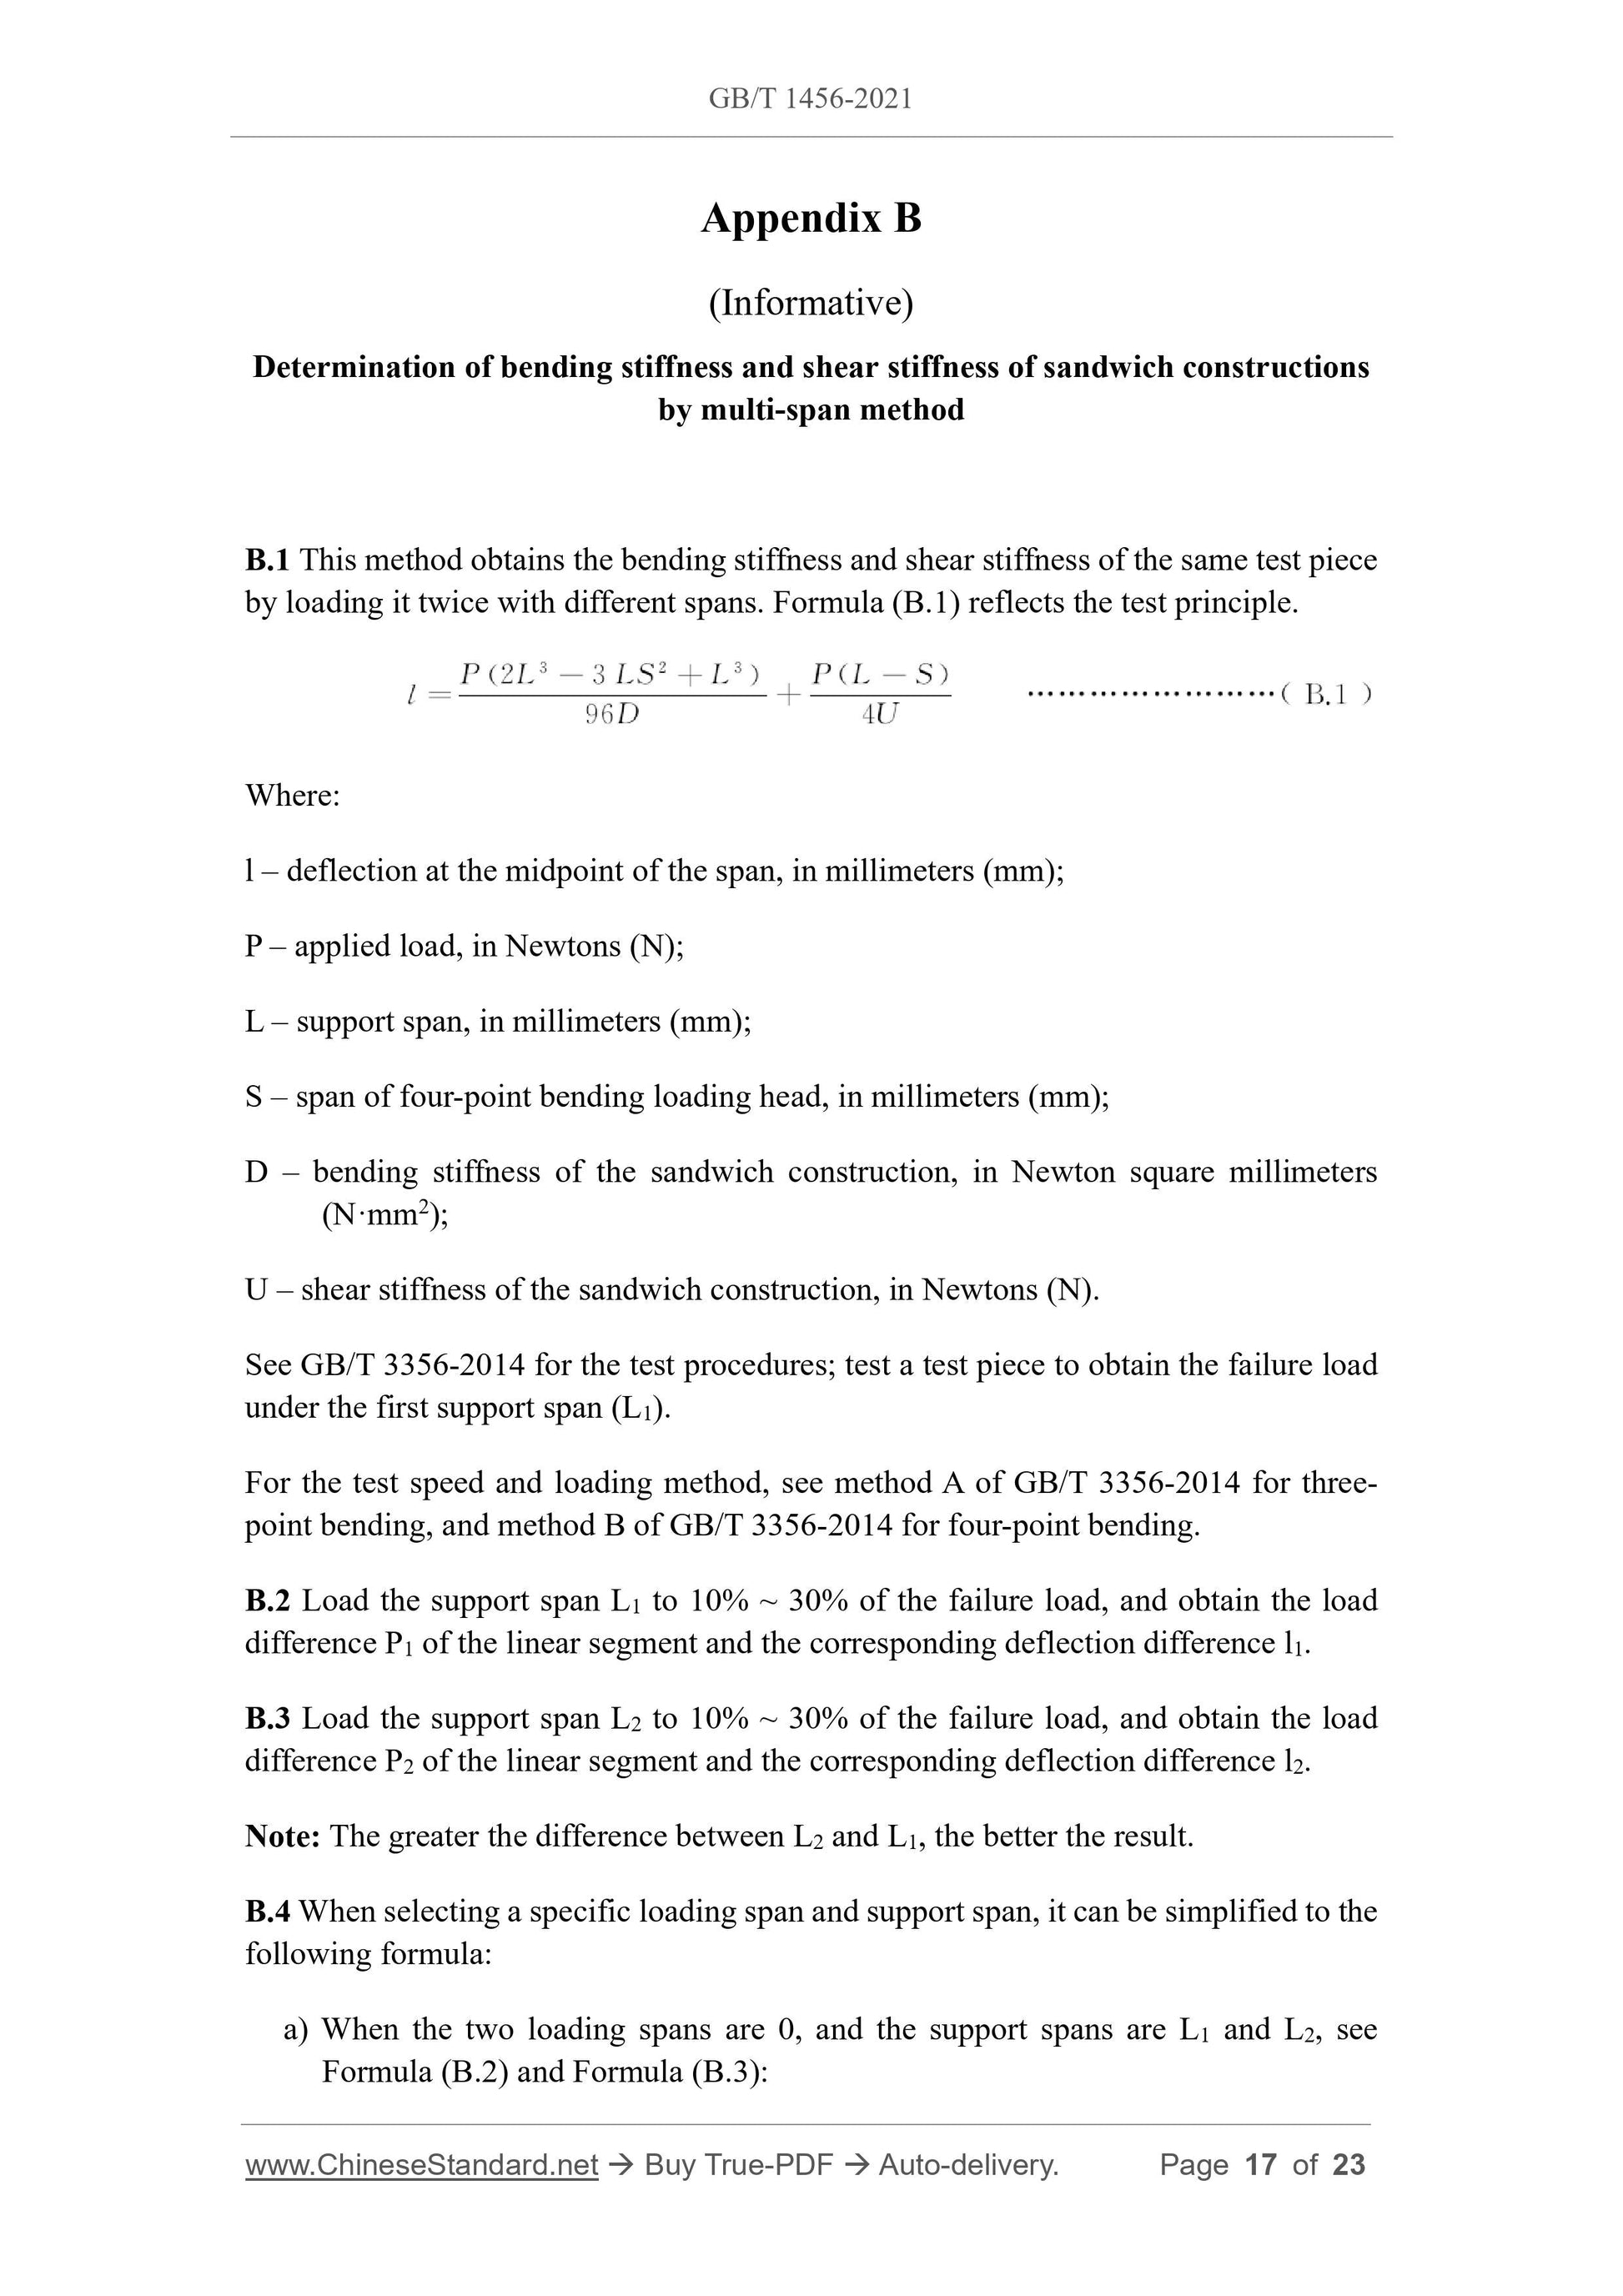 GB/T 1456-2021 Page 9